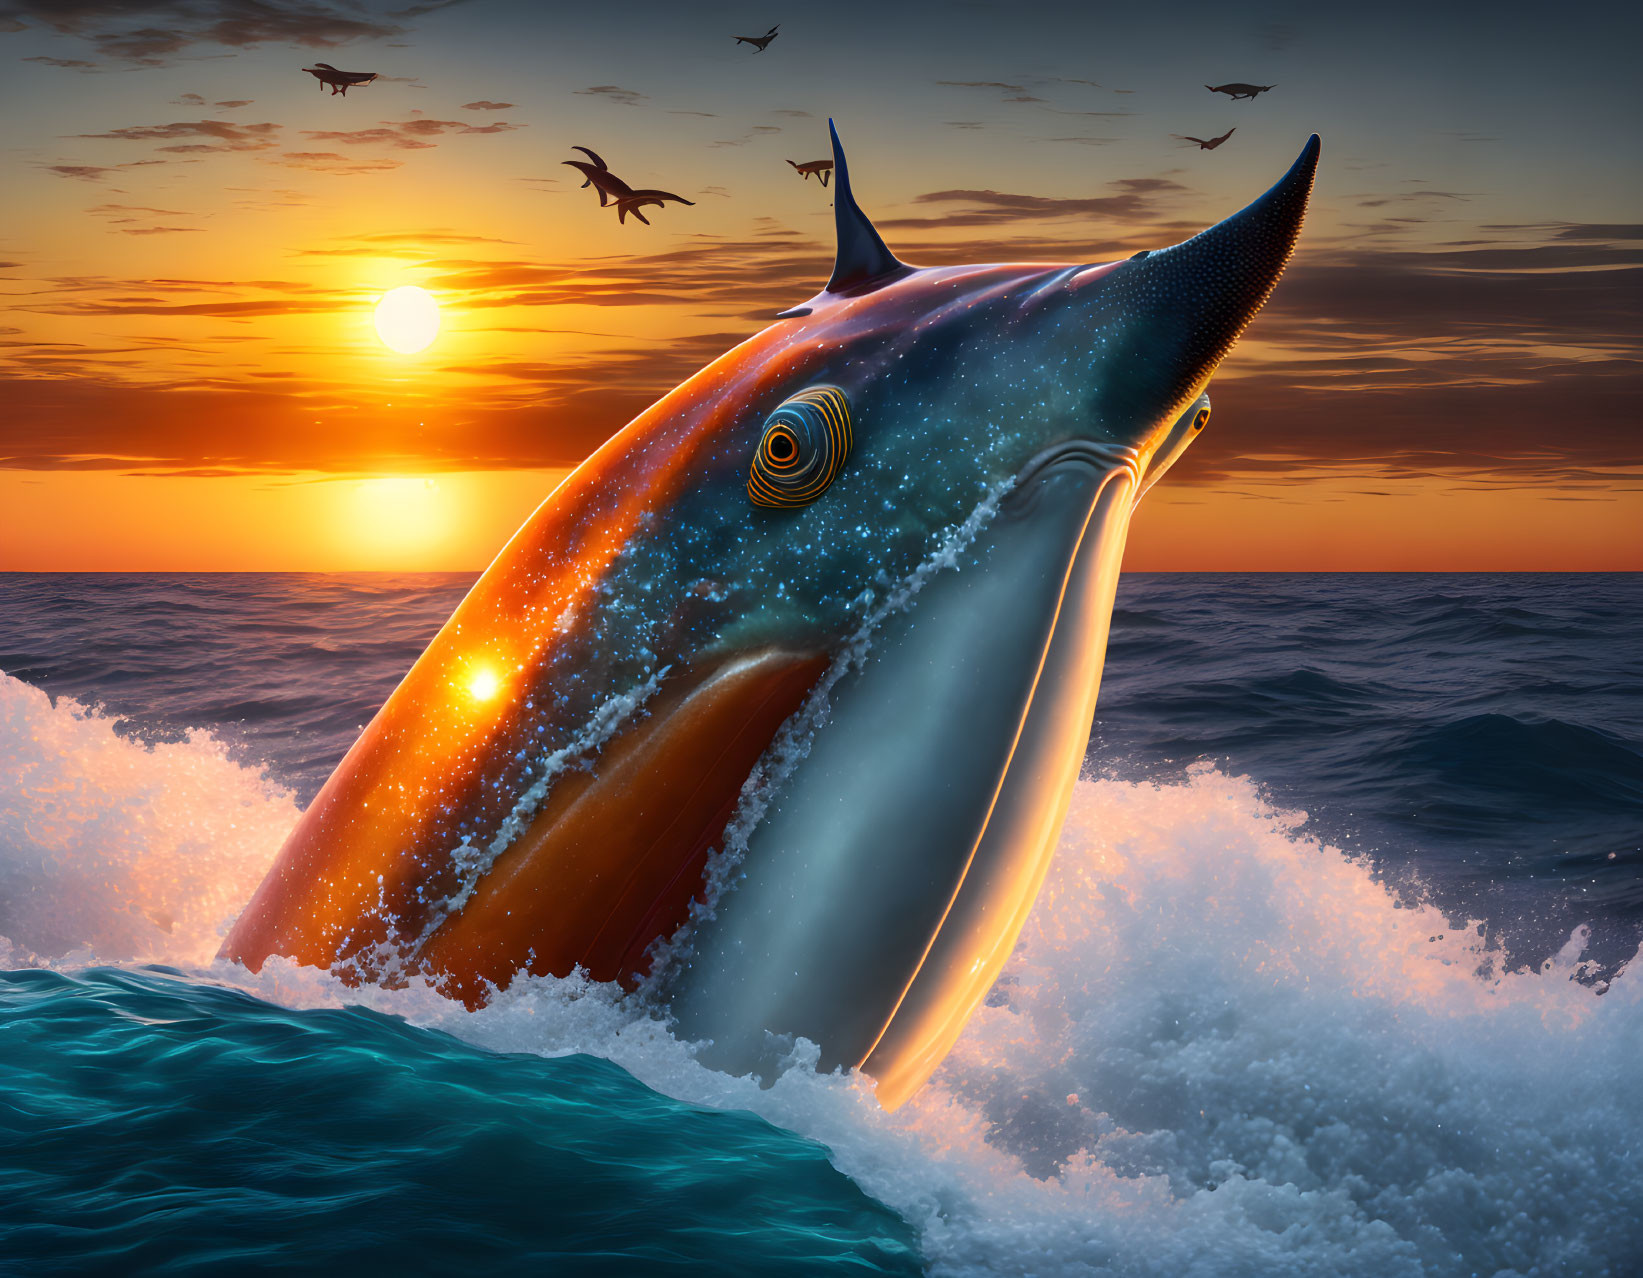 Surreal sunset scene: giant fish-bird emerges from sea